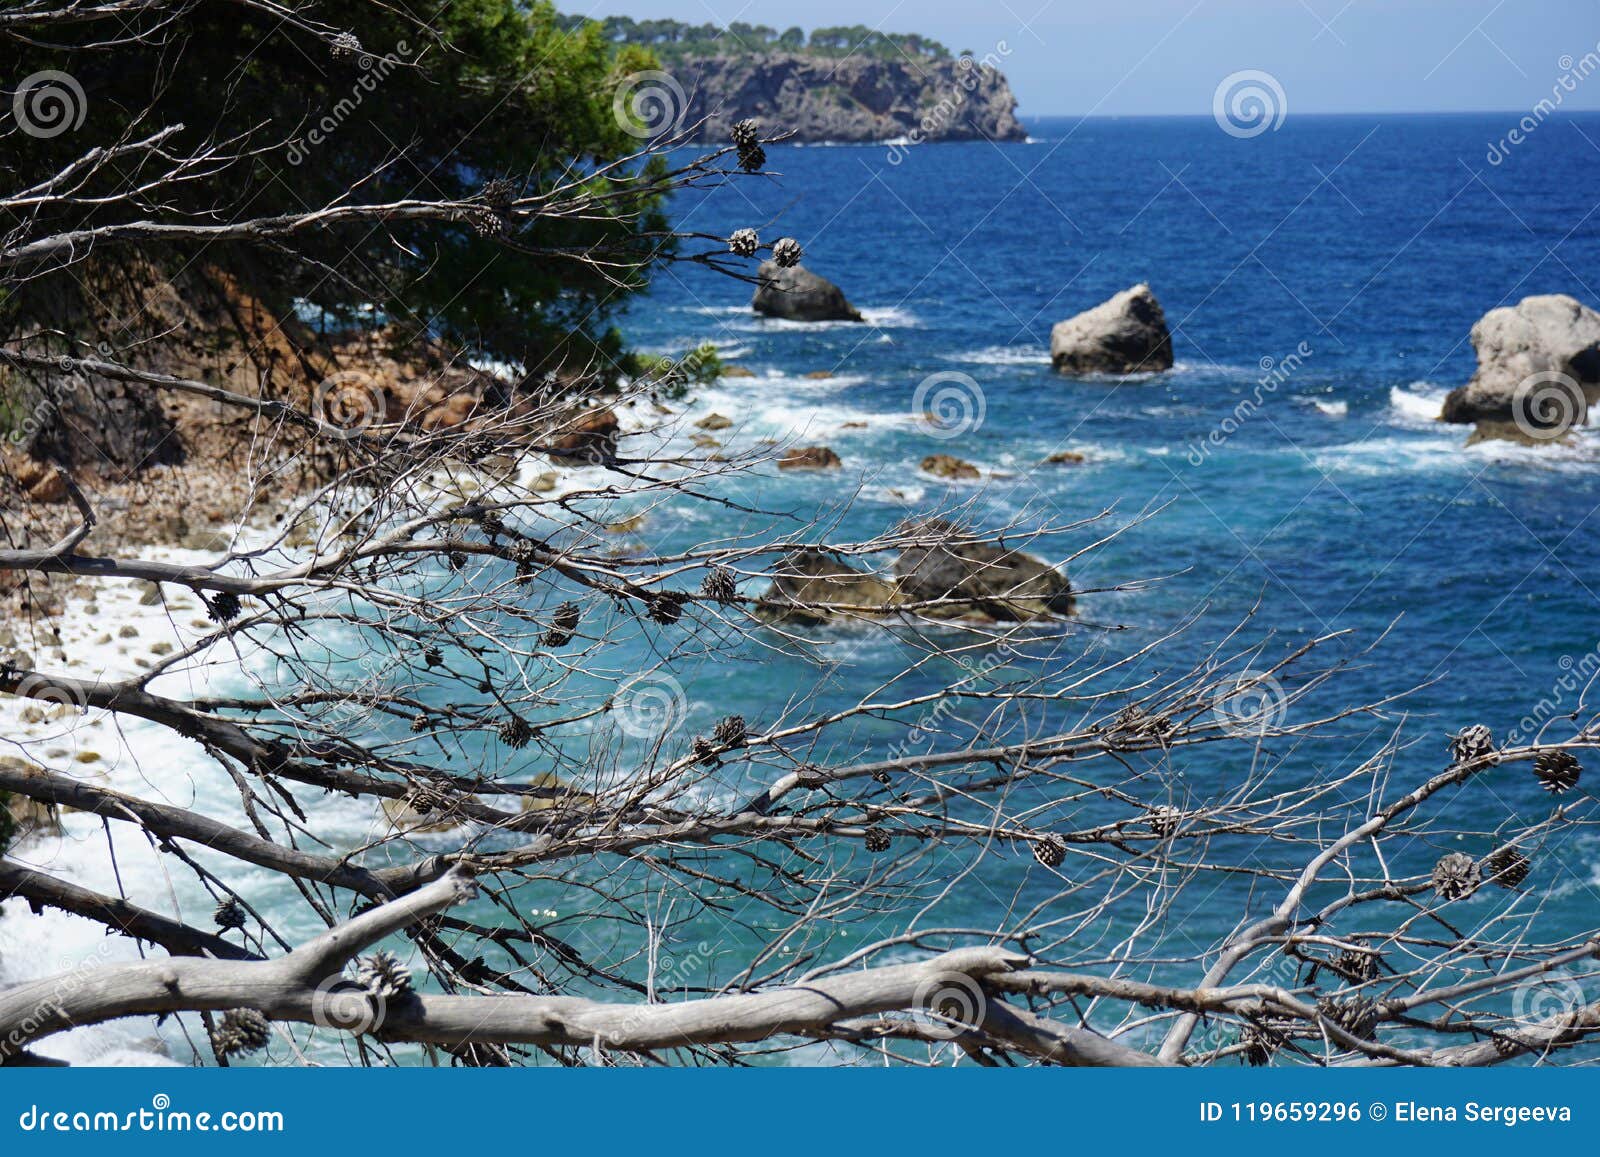 View of the Sea through Pine Branches Stock Photo - Image of card